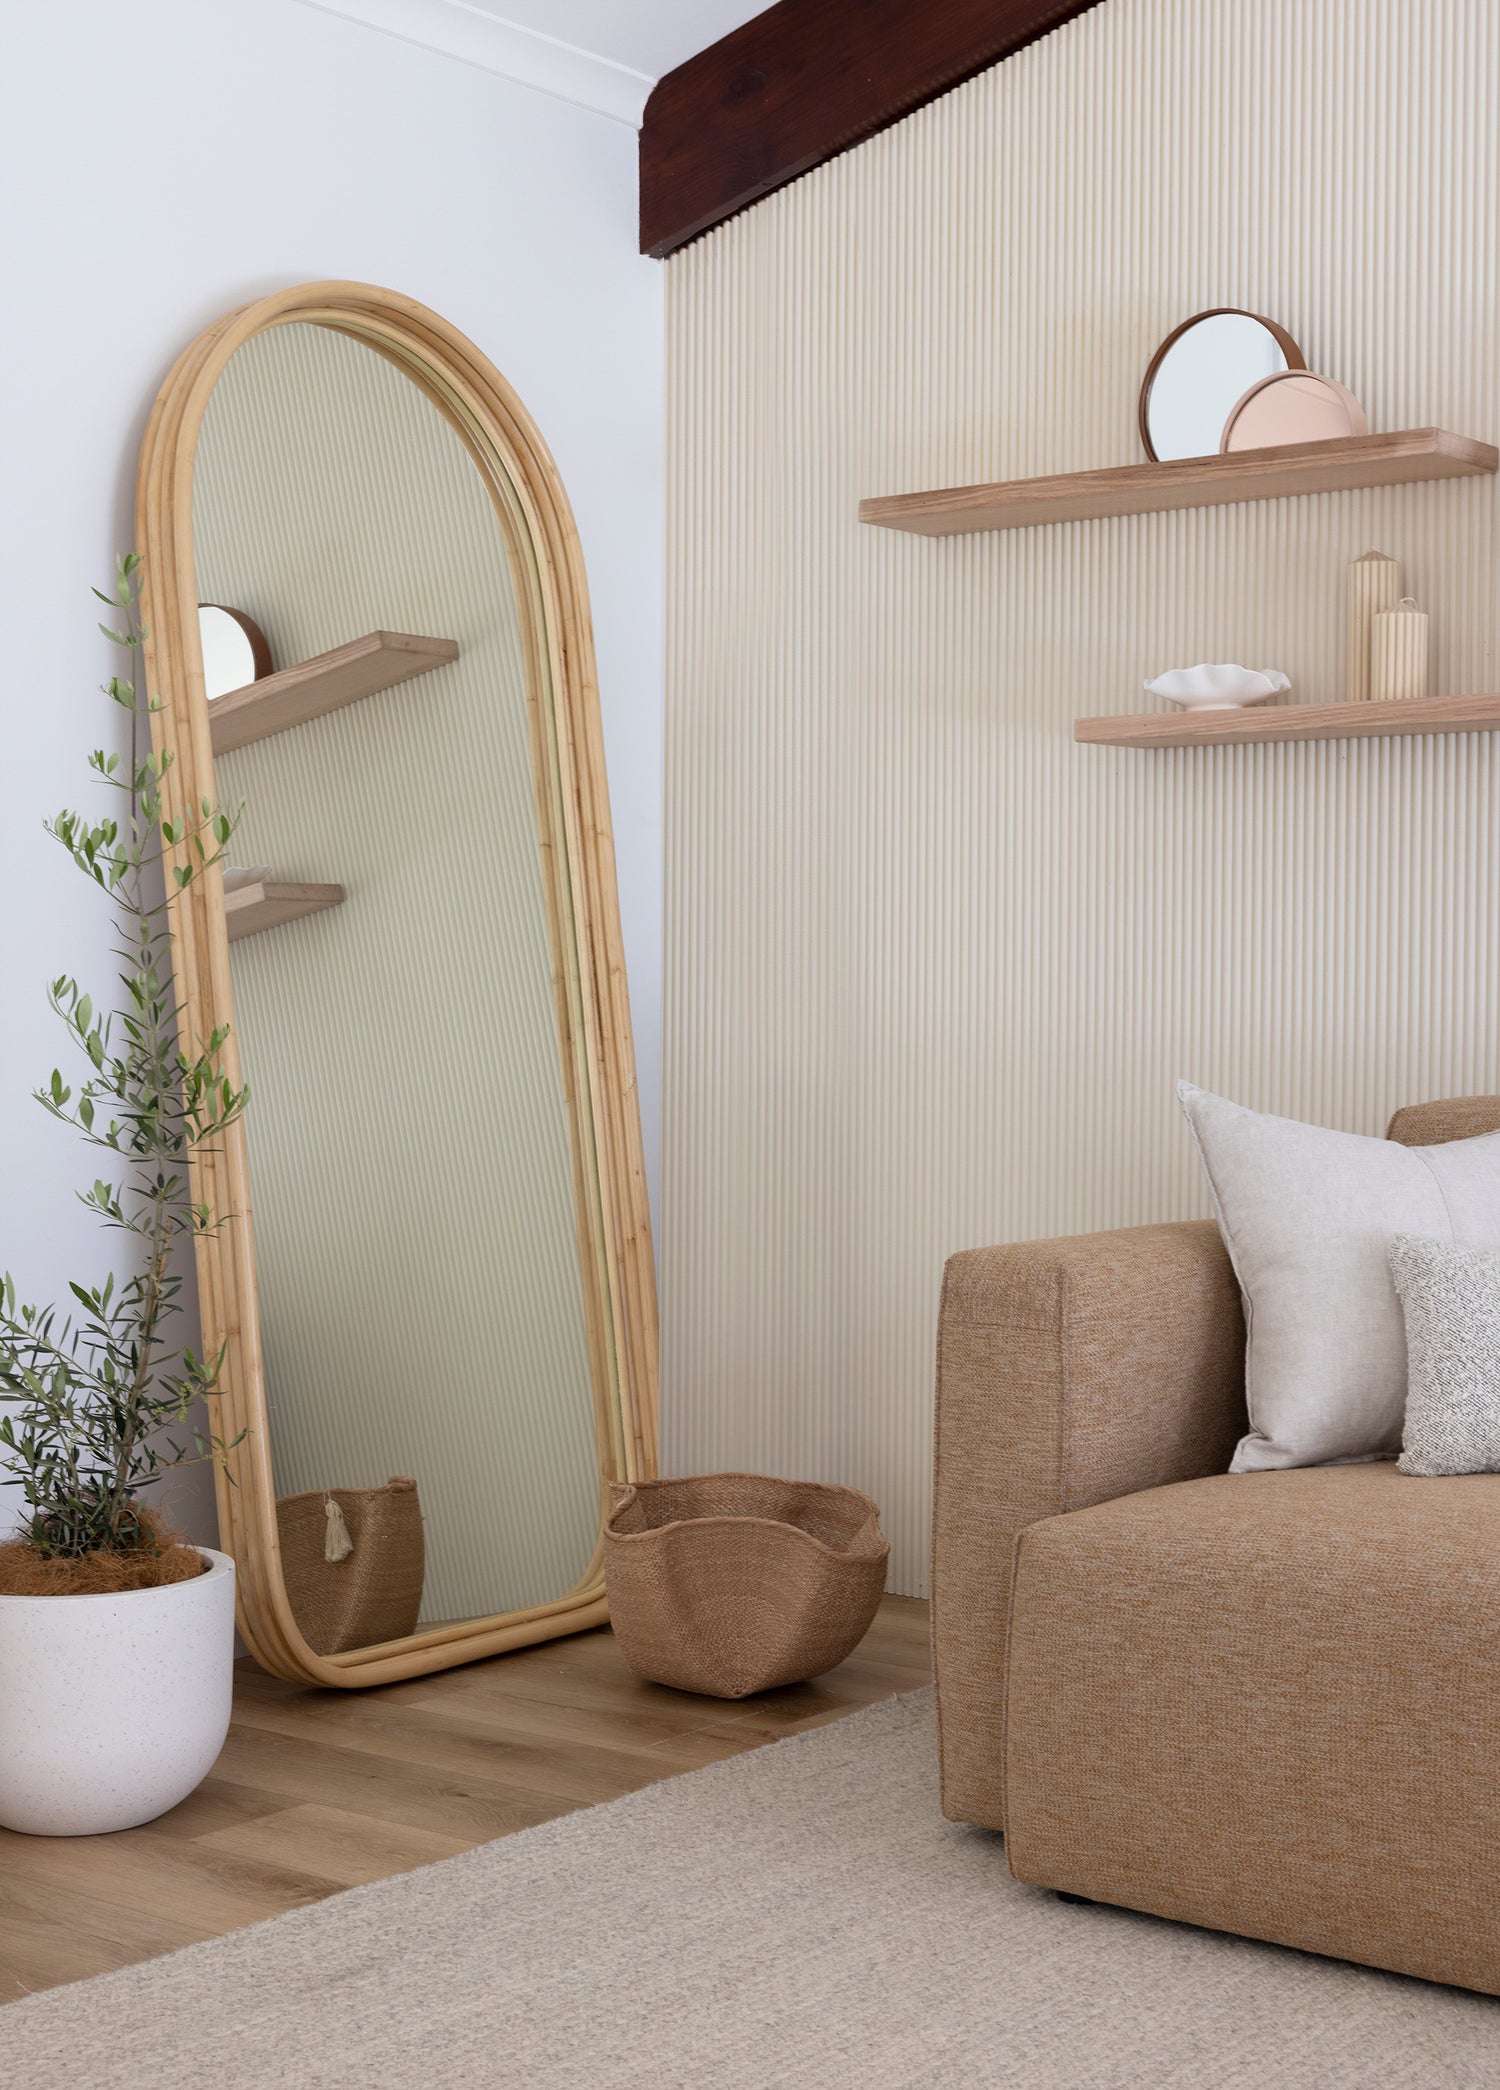 shelf and mirror in room